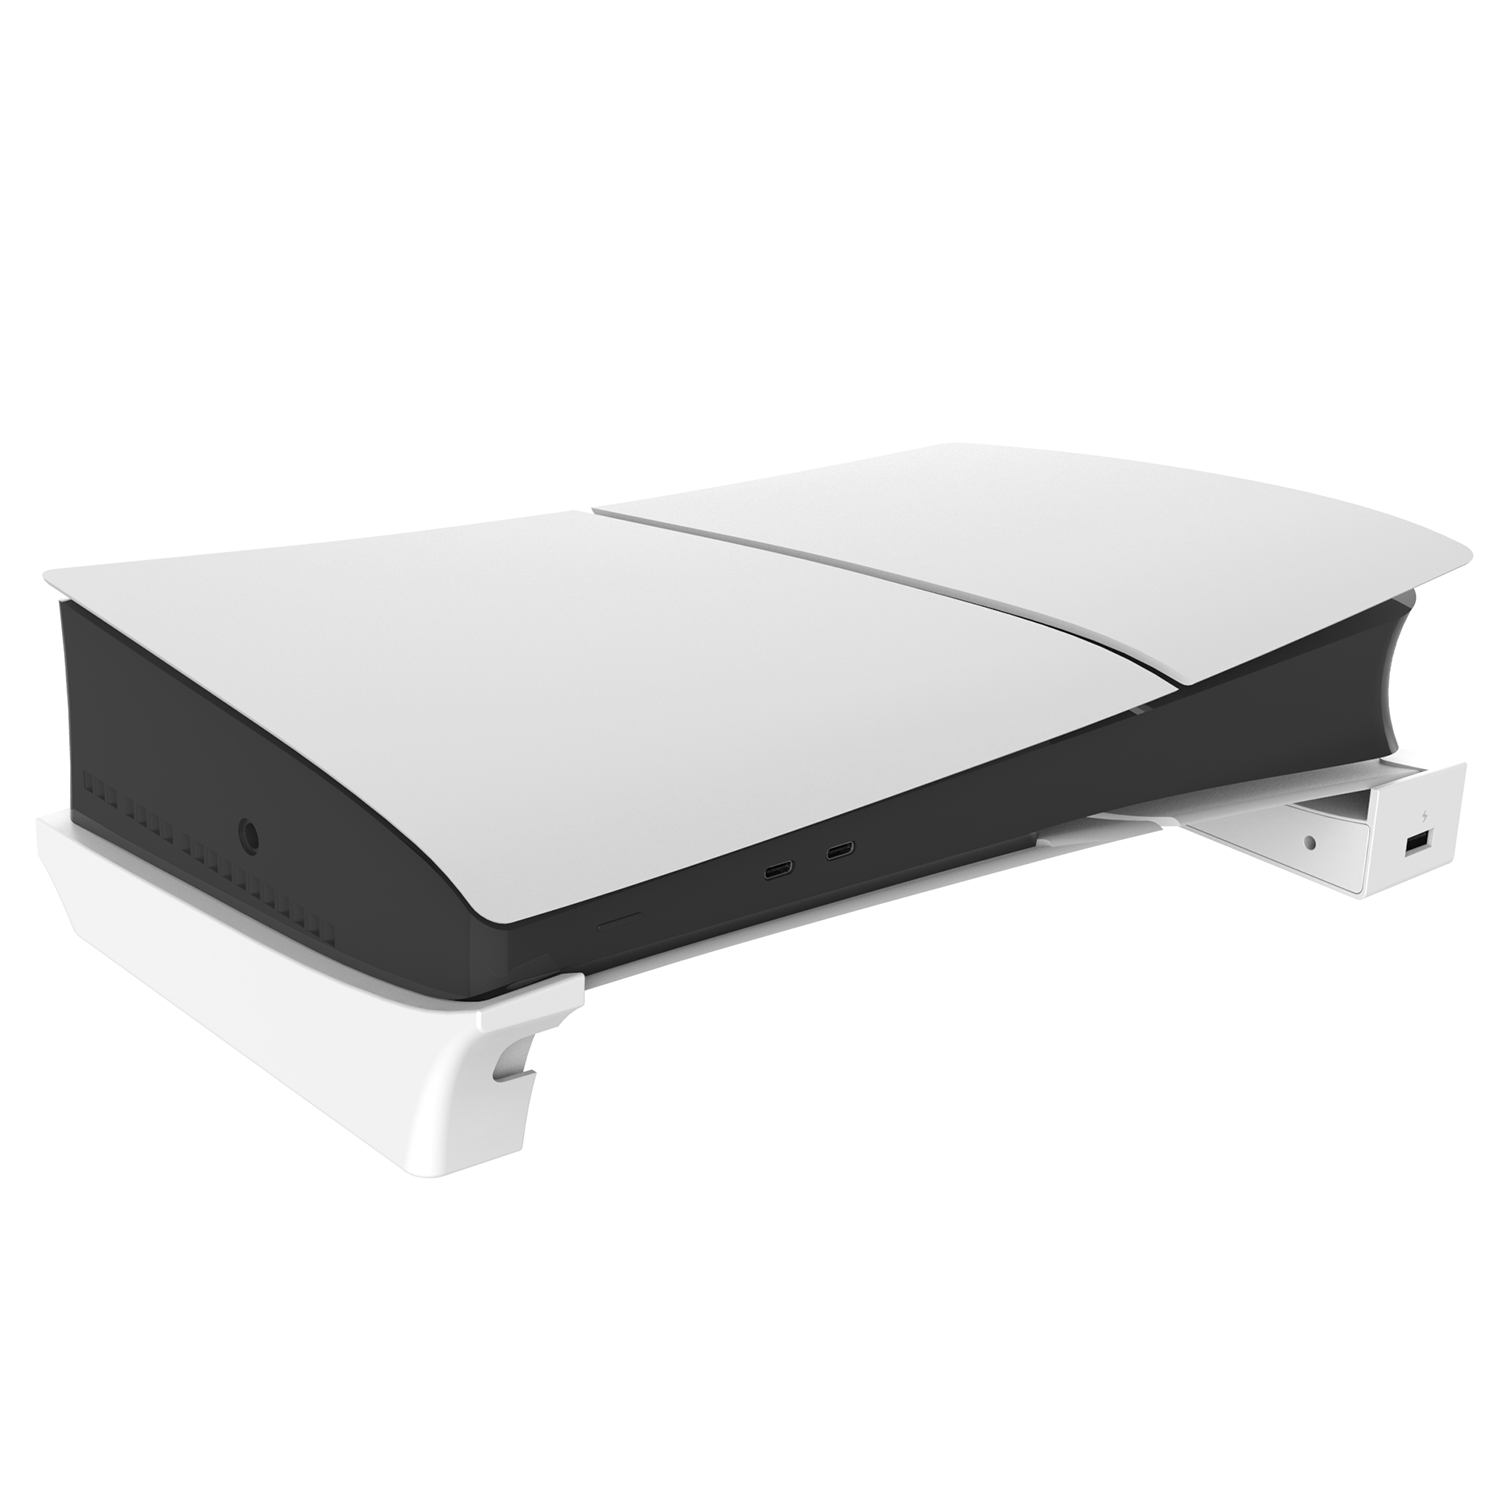 Gaming-Sony PlayStation P5 Slim Horizontal Stand Holder Dock Station With USB Extension Hub